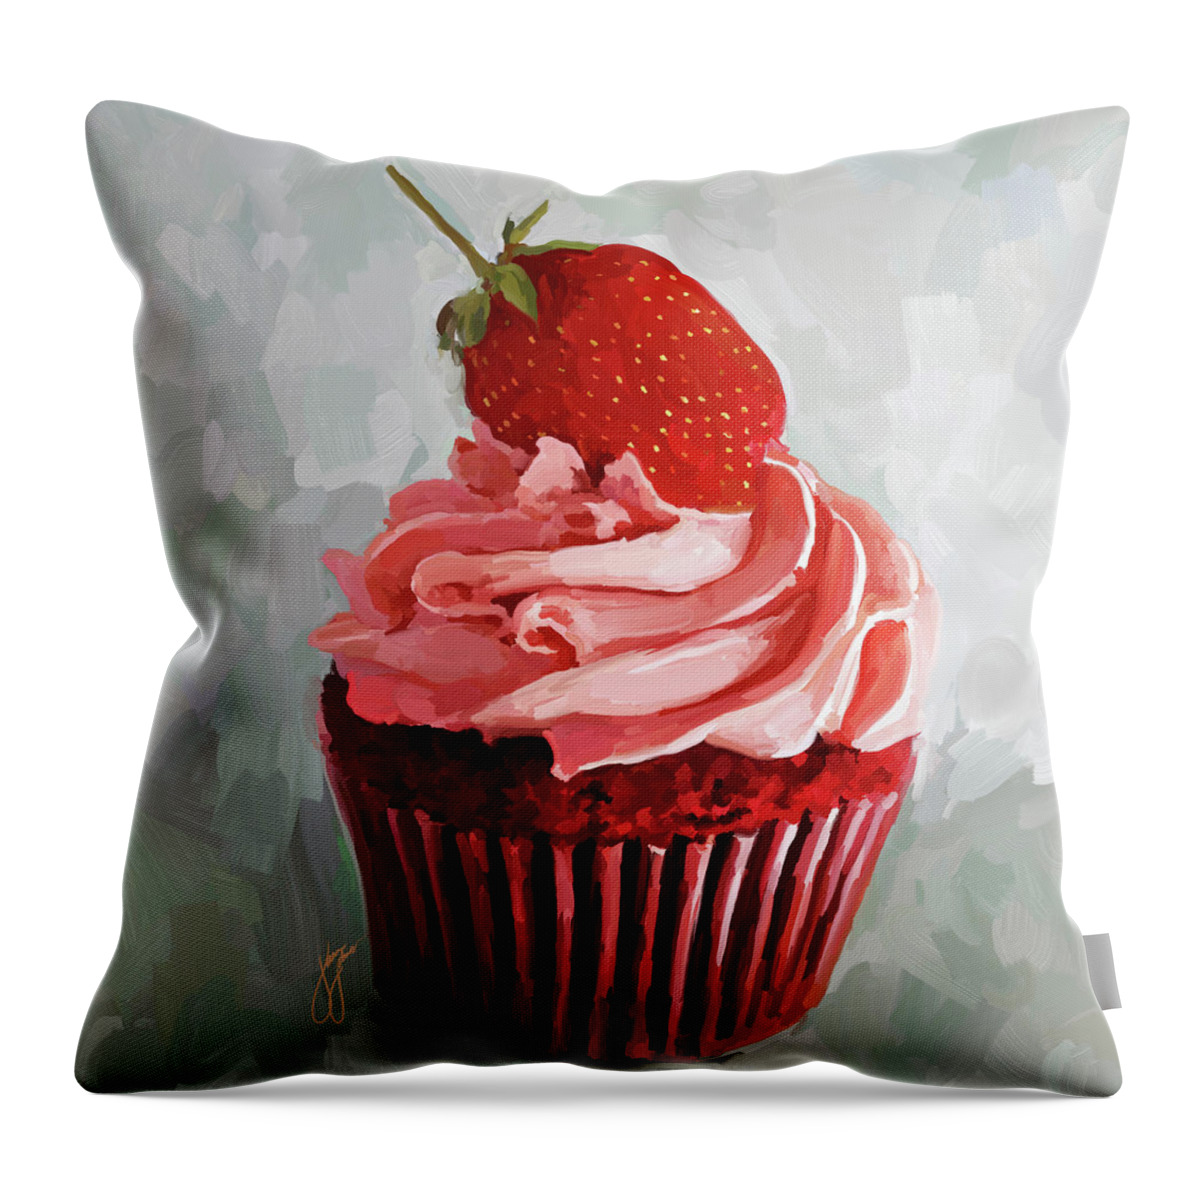 Strawberry Throw Pillow featuring the painting Strawberry Cupcake by Jai Johnson